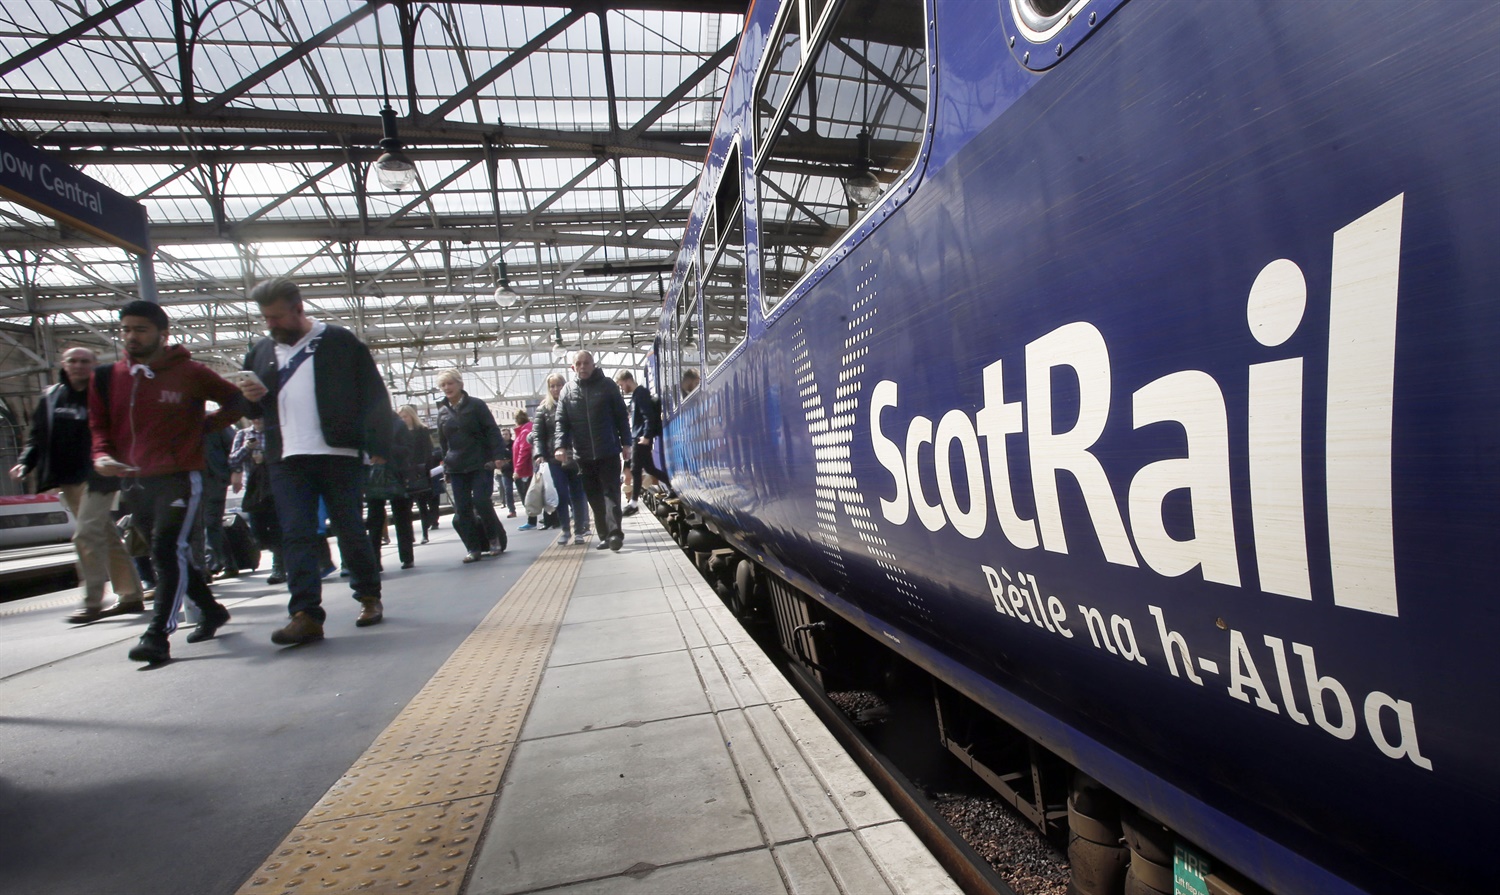 ScotRail to introduce 200 additional services from 2018